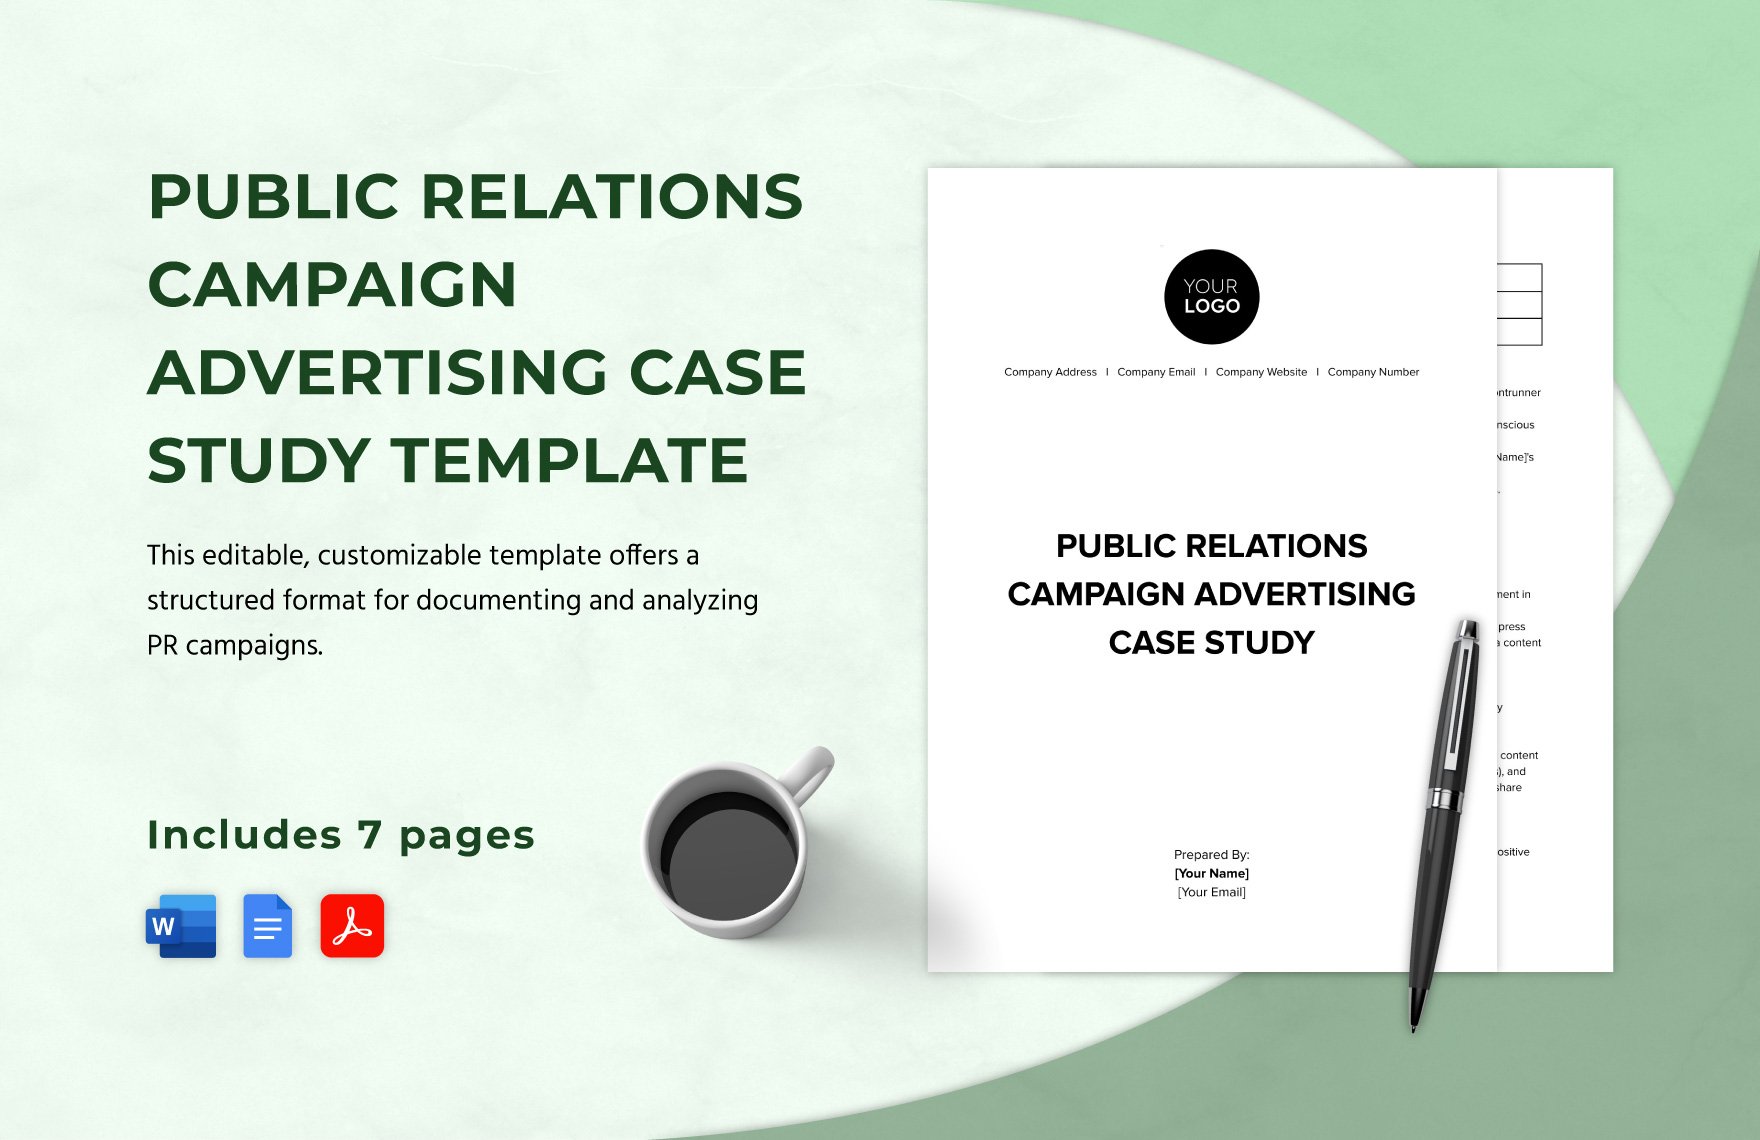 Public Relations Campaign Advertising Case Study Template in Word, Google Docs, PDF